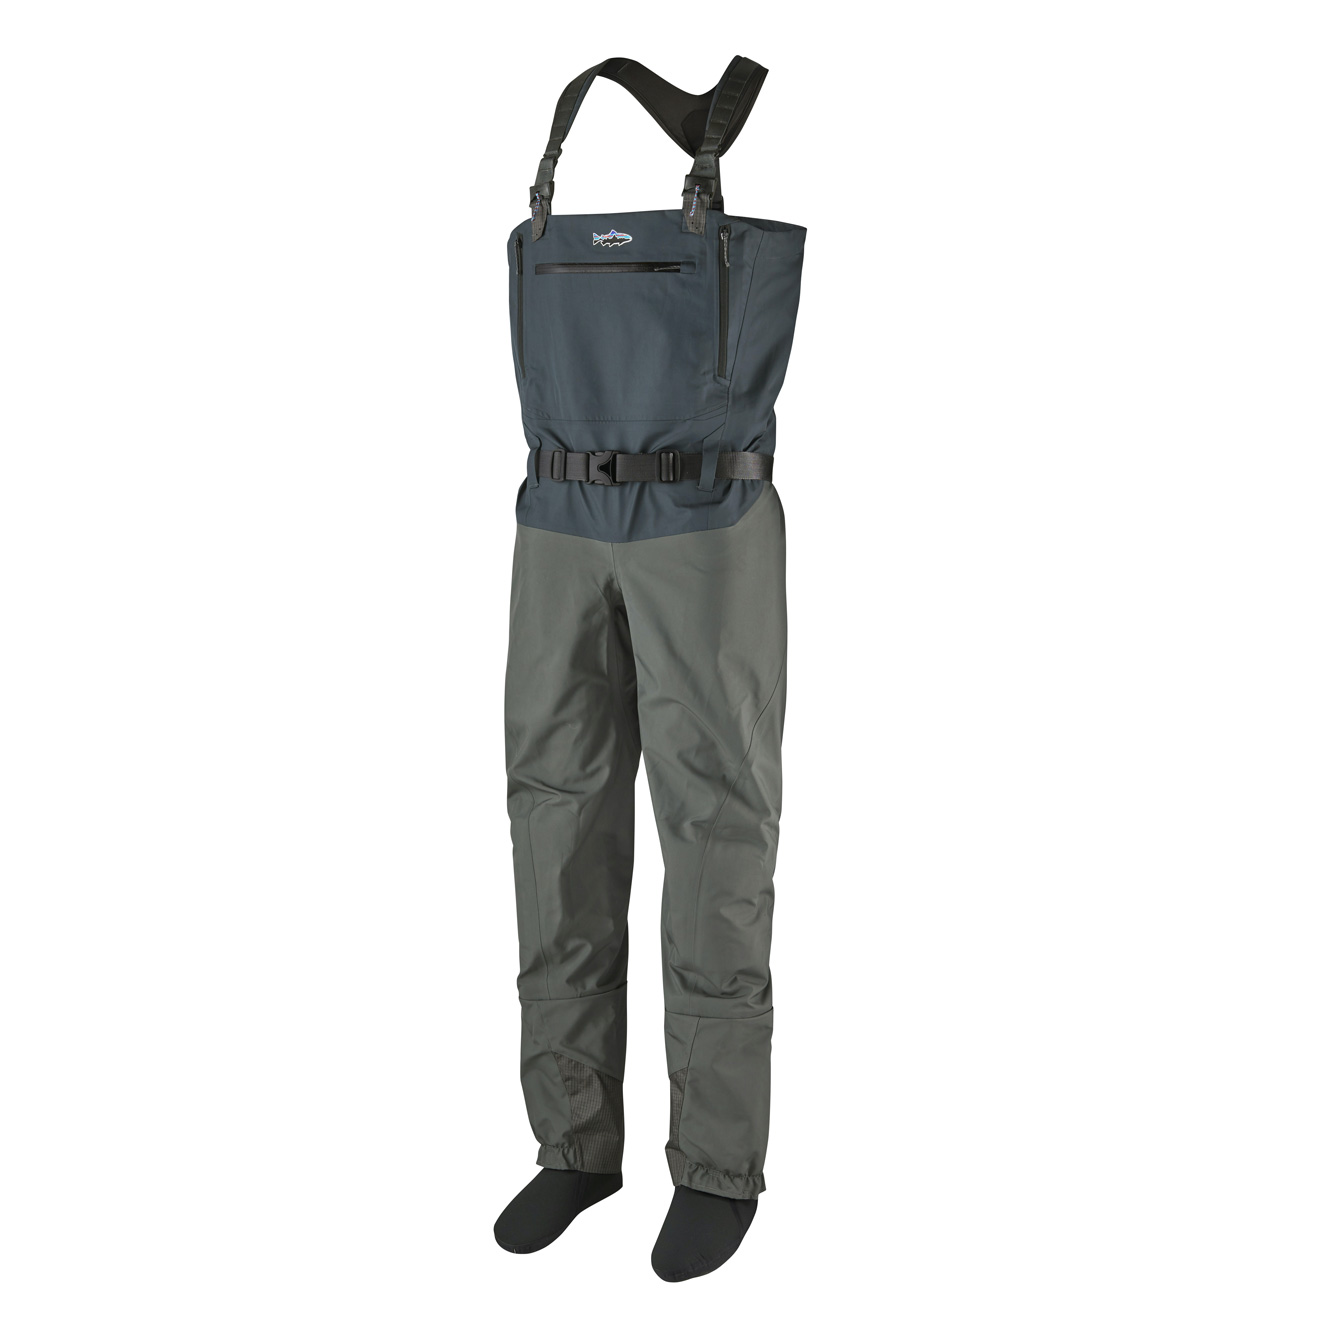 Patagonia Men's Swiftcurrent Expedition Wader - XSM